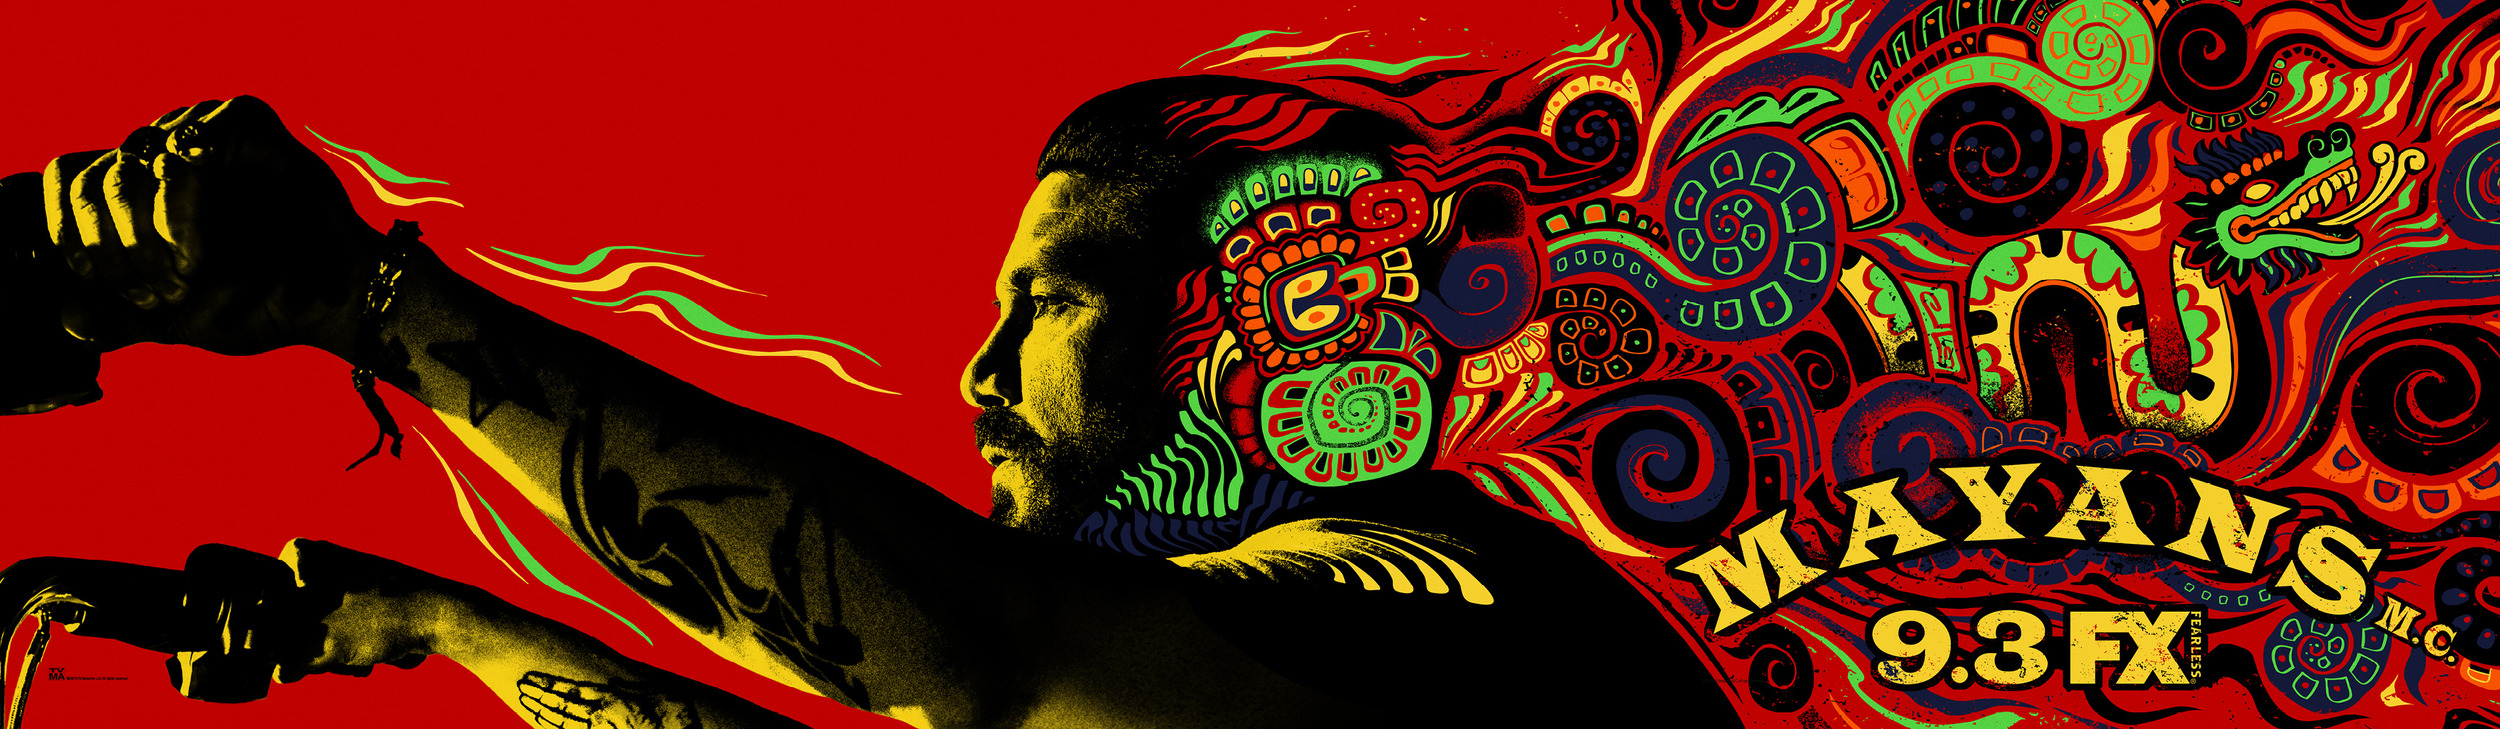 Mega Sized Movie Poster Image for Mayans M.C. (#8 of 15)